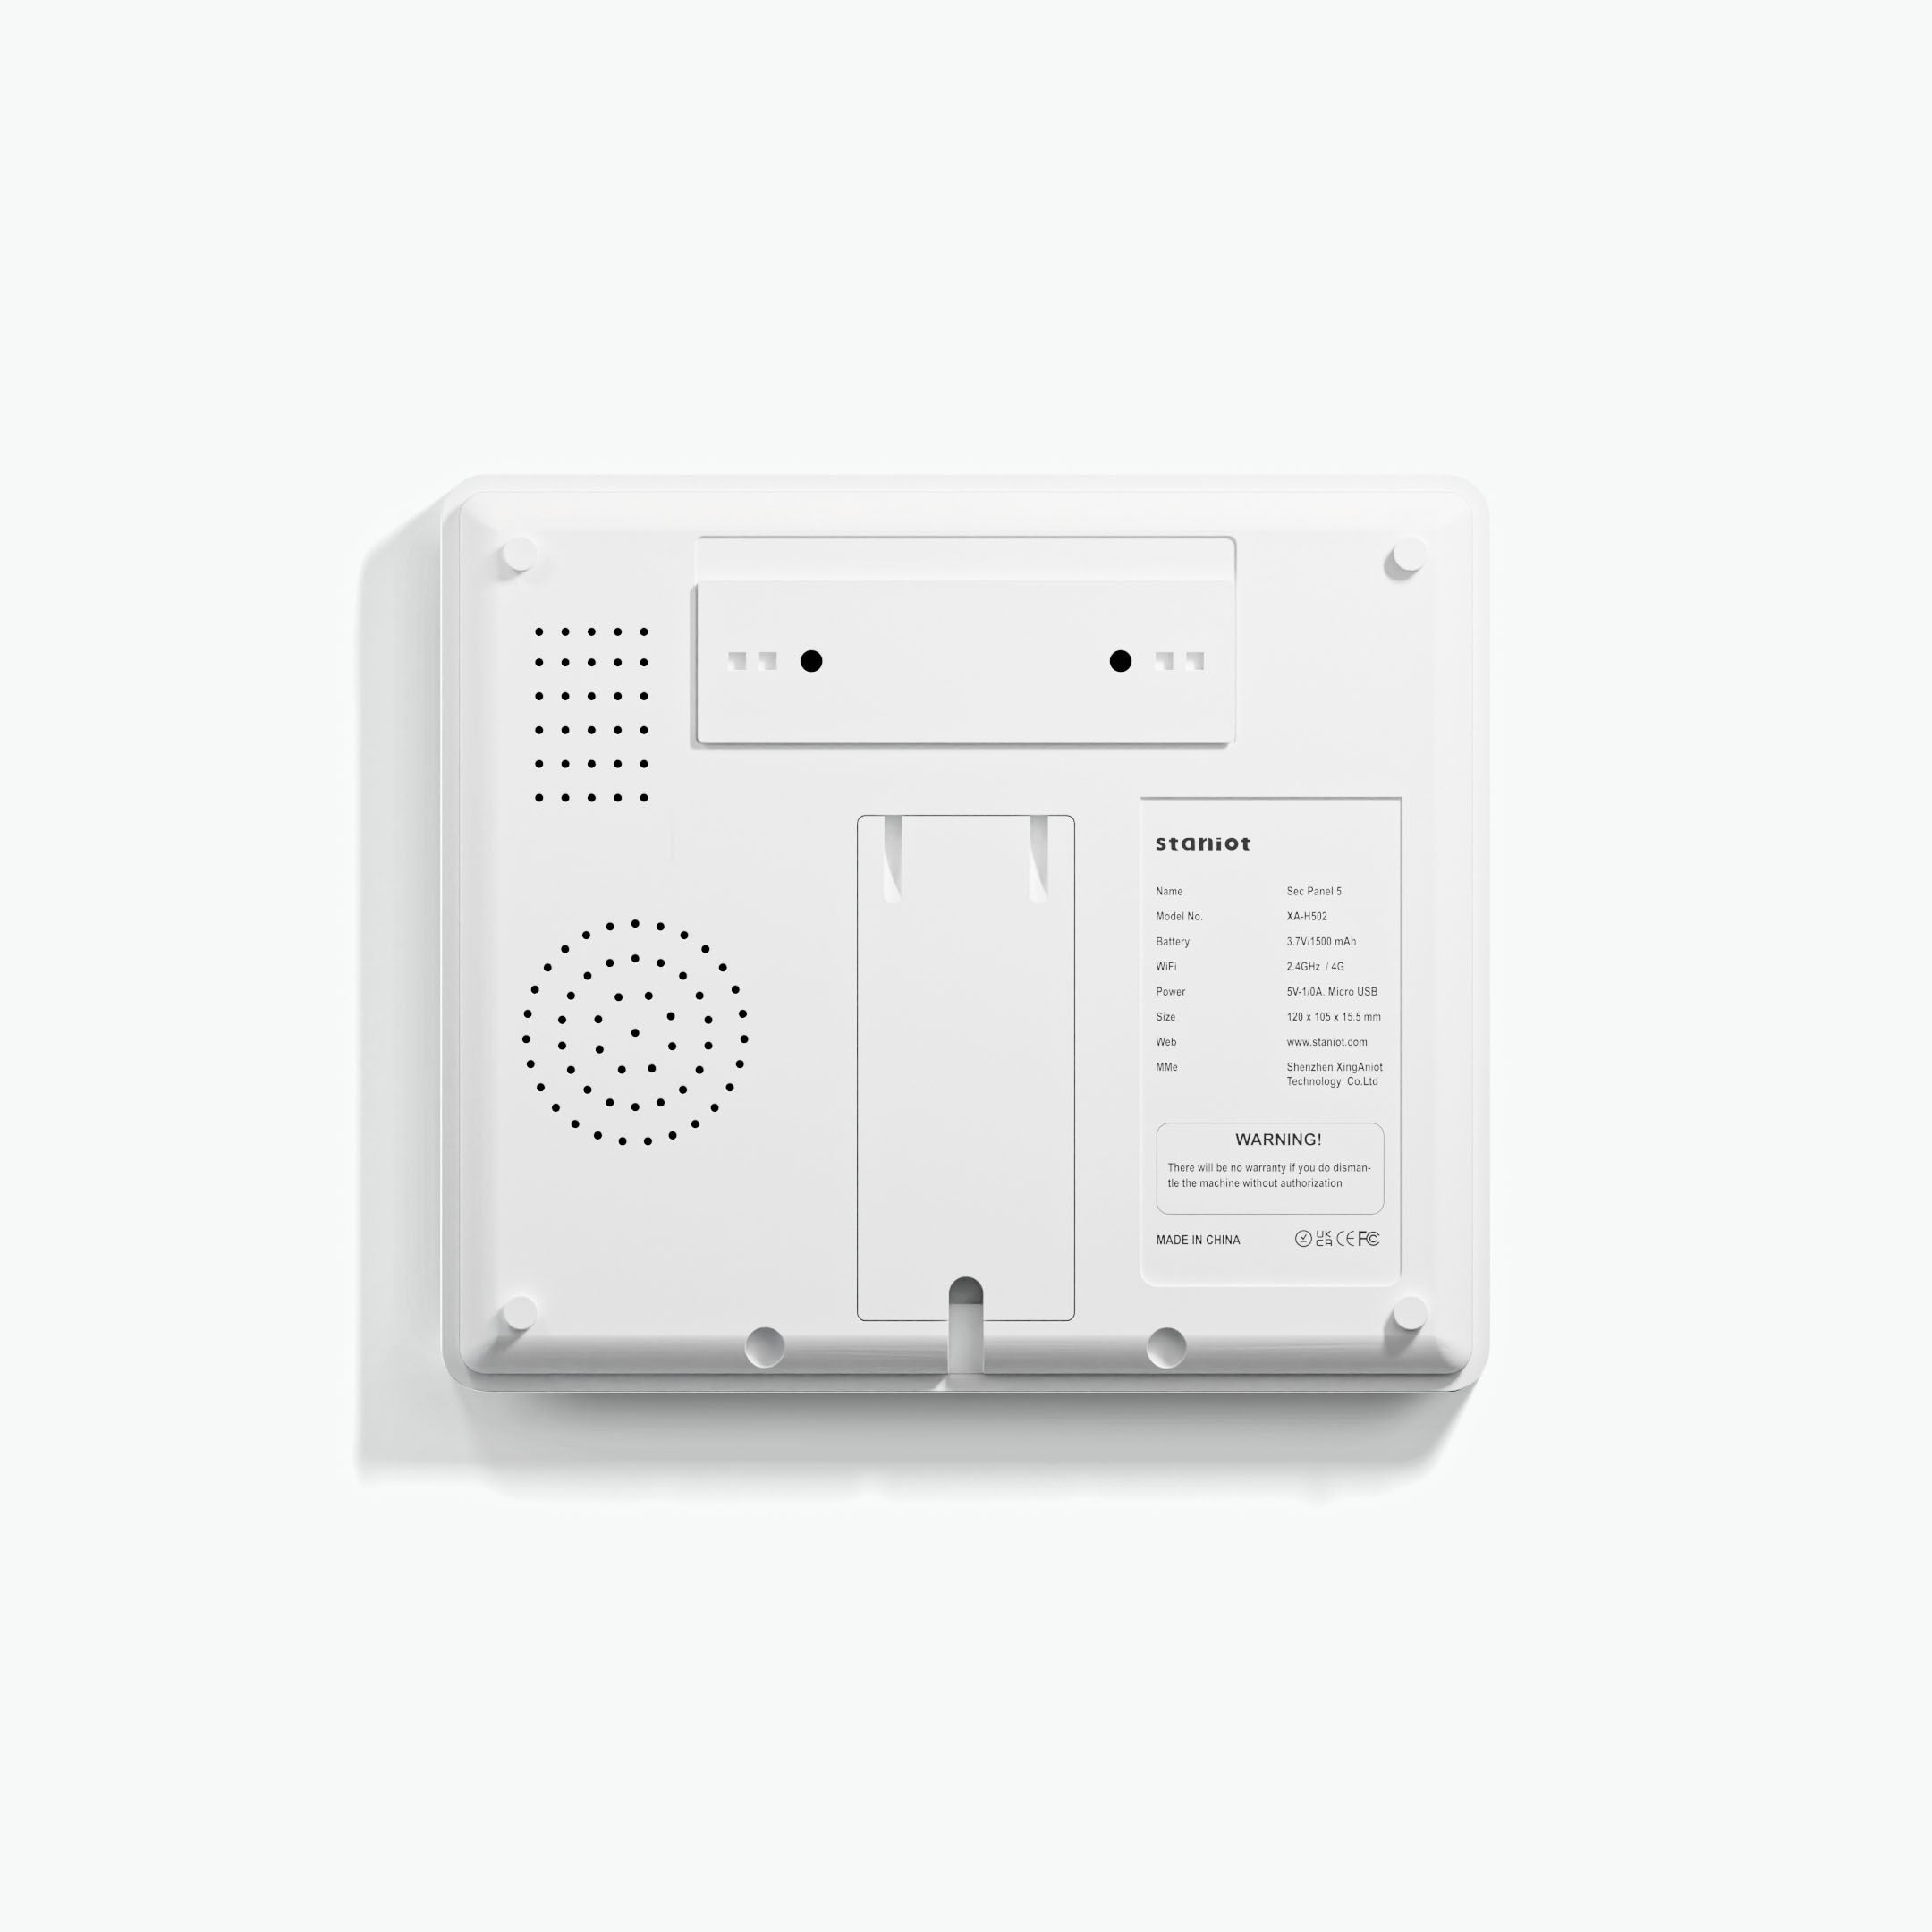 Staniot SecPanel 5 - H502 - Smart security System display panel back view on a white background